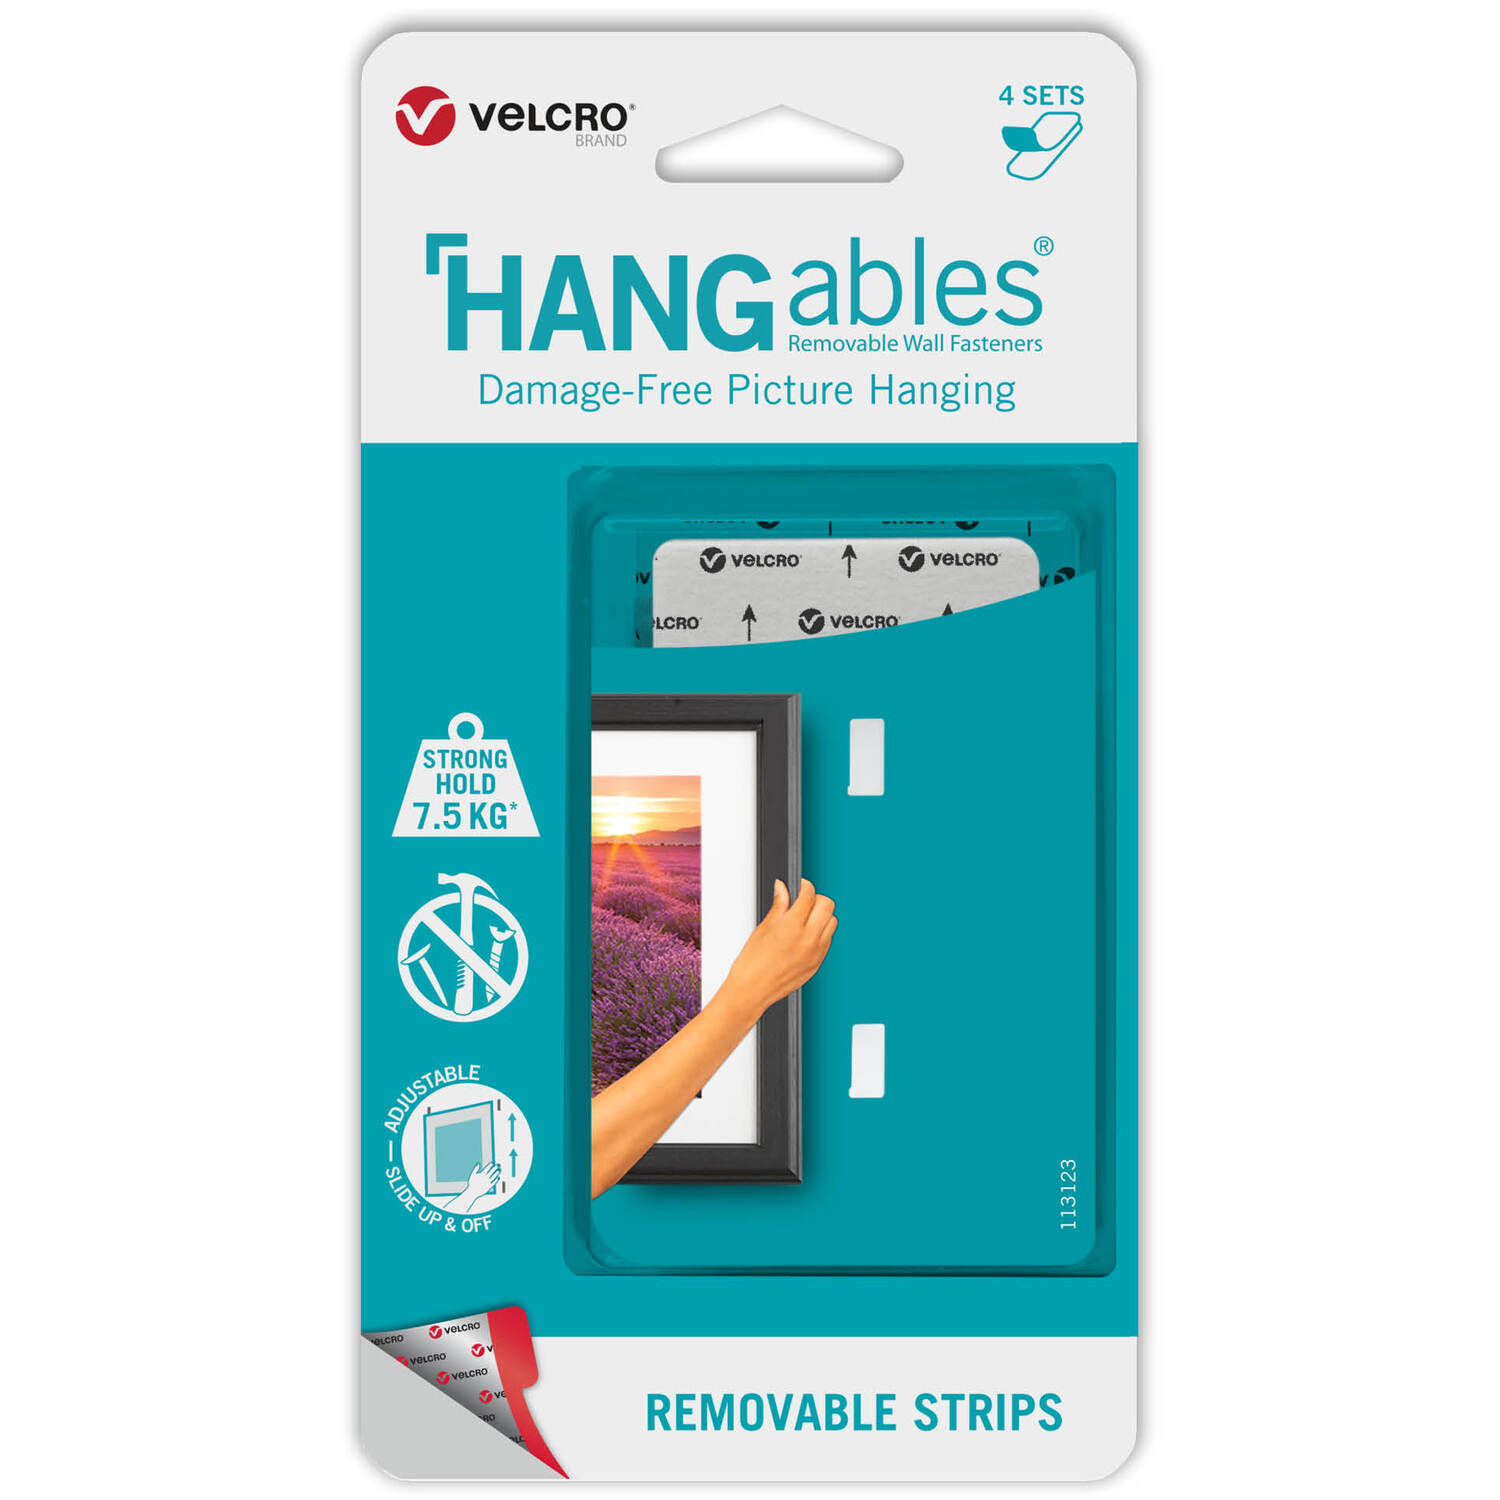 Velcro Hangables Picture Hanging Adhesive Strips Set of 4 Image 1